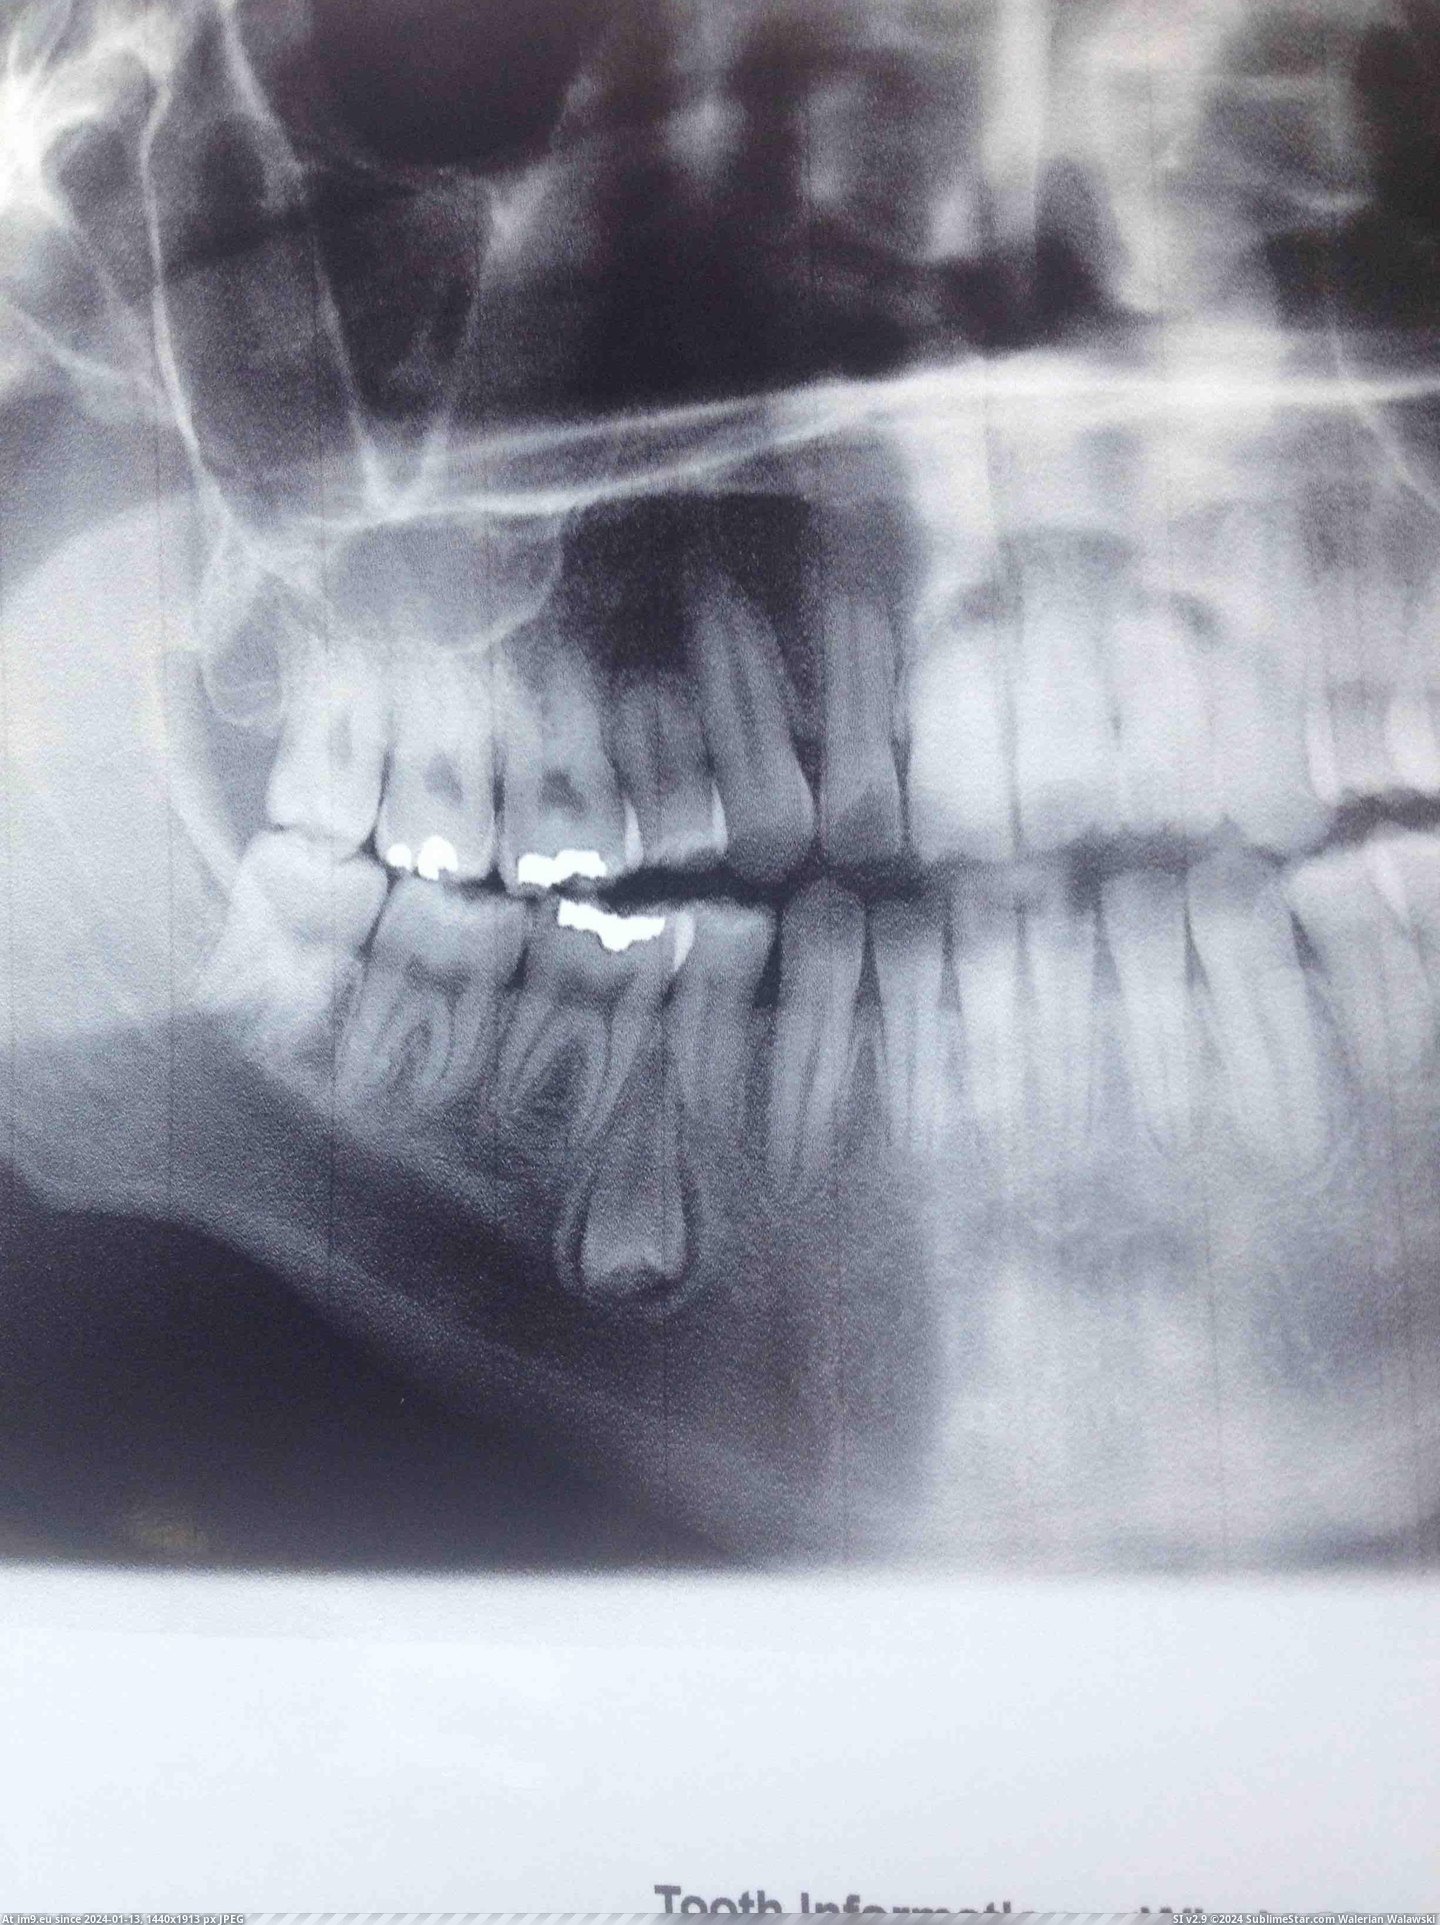 #Wtf #Growing #Tooth #Dentist #Gums #Upside #Discovered [Wtf] Went to the Dentist yesterday, they discovered a tooth growing upside down in my gums. Pic. (Bild von album My r/WTF favs))